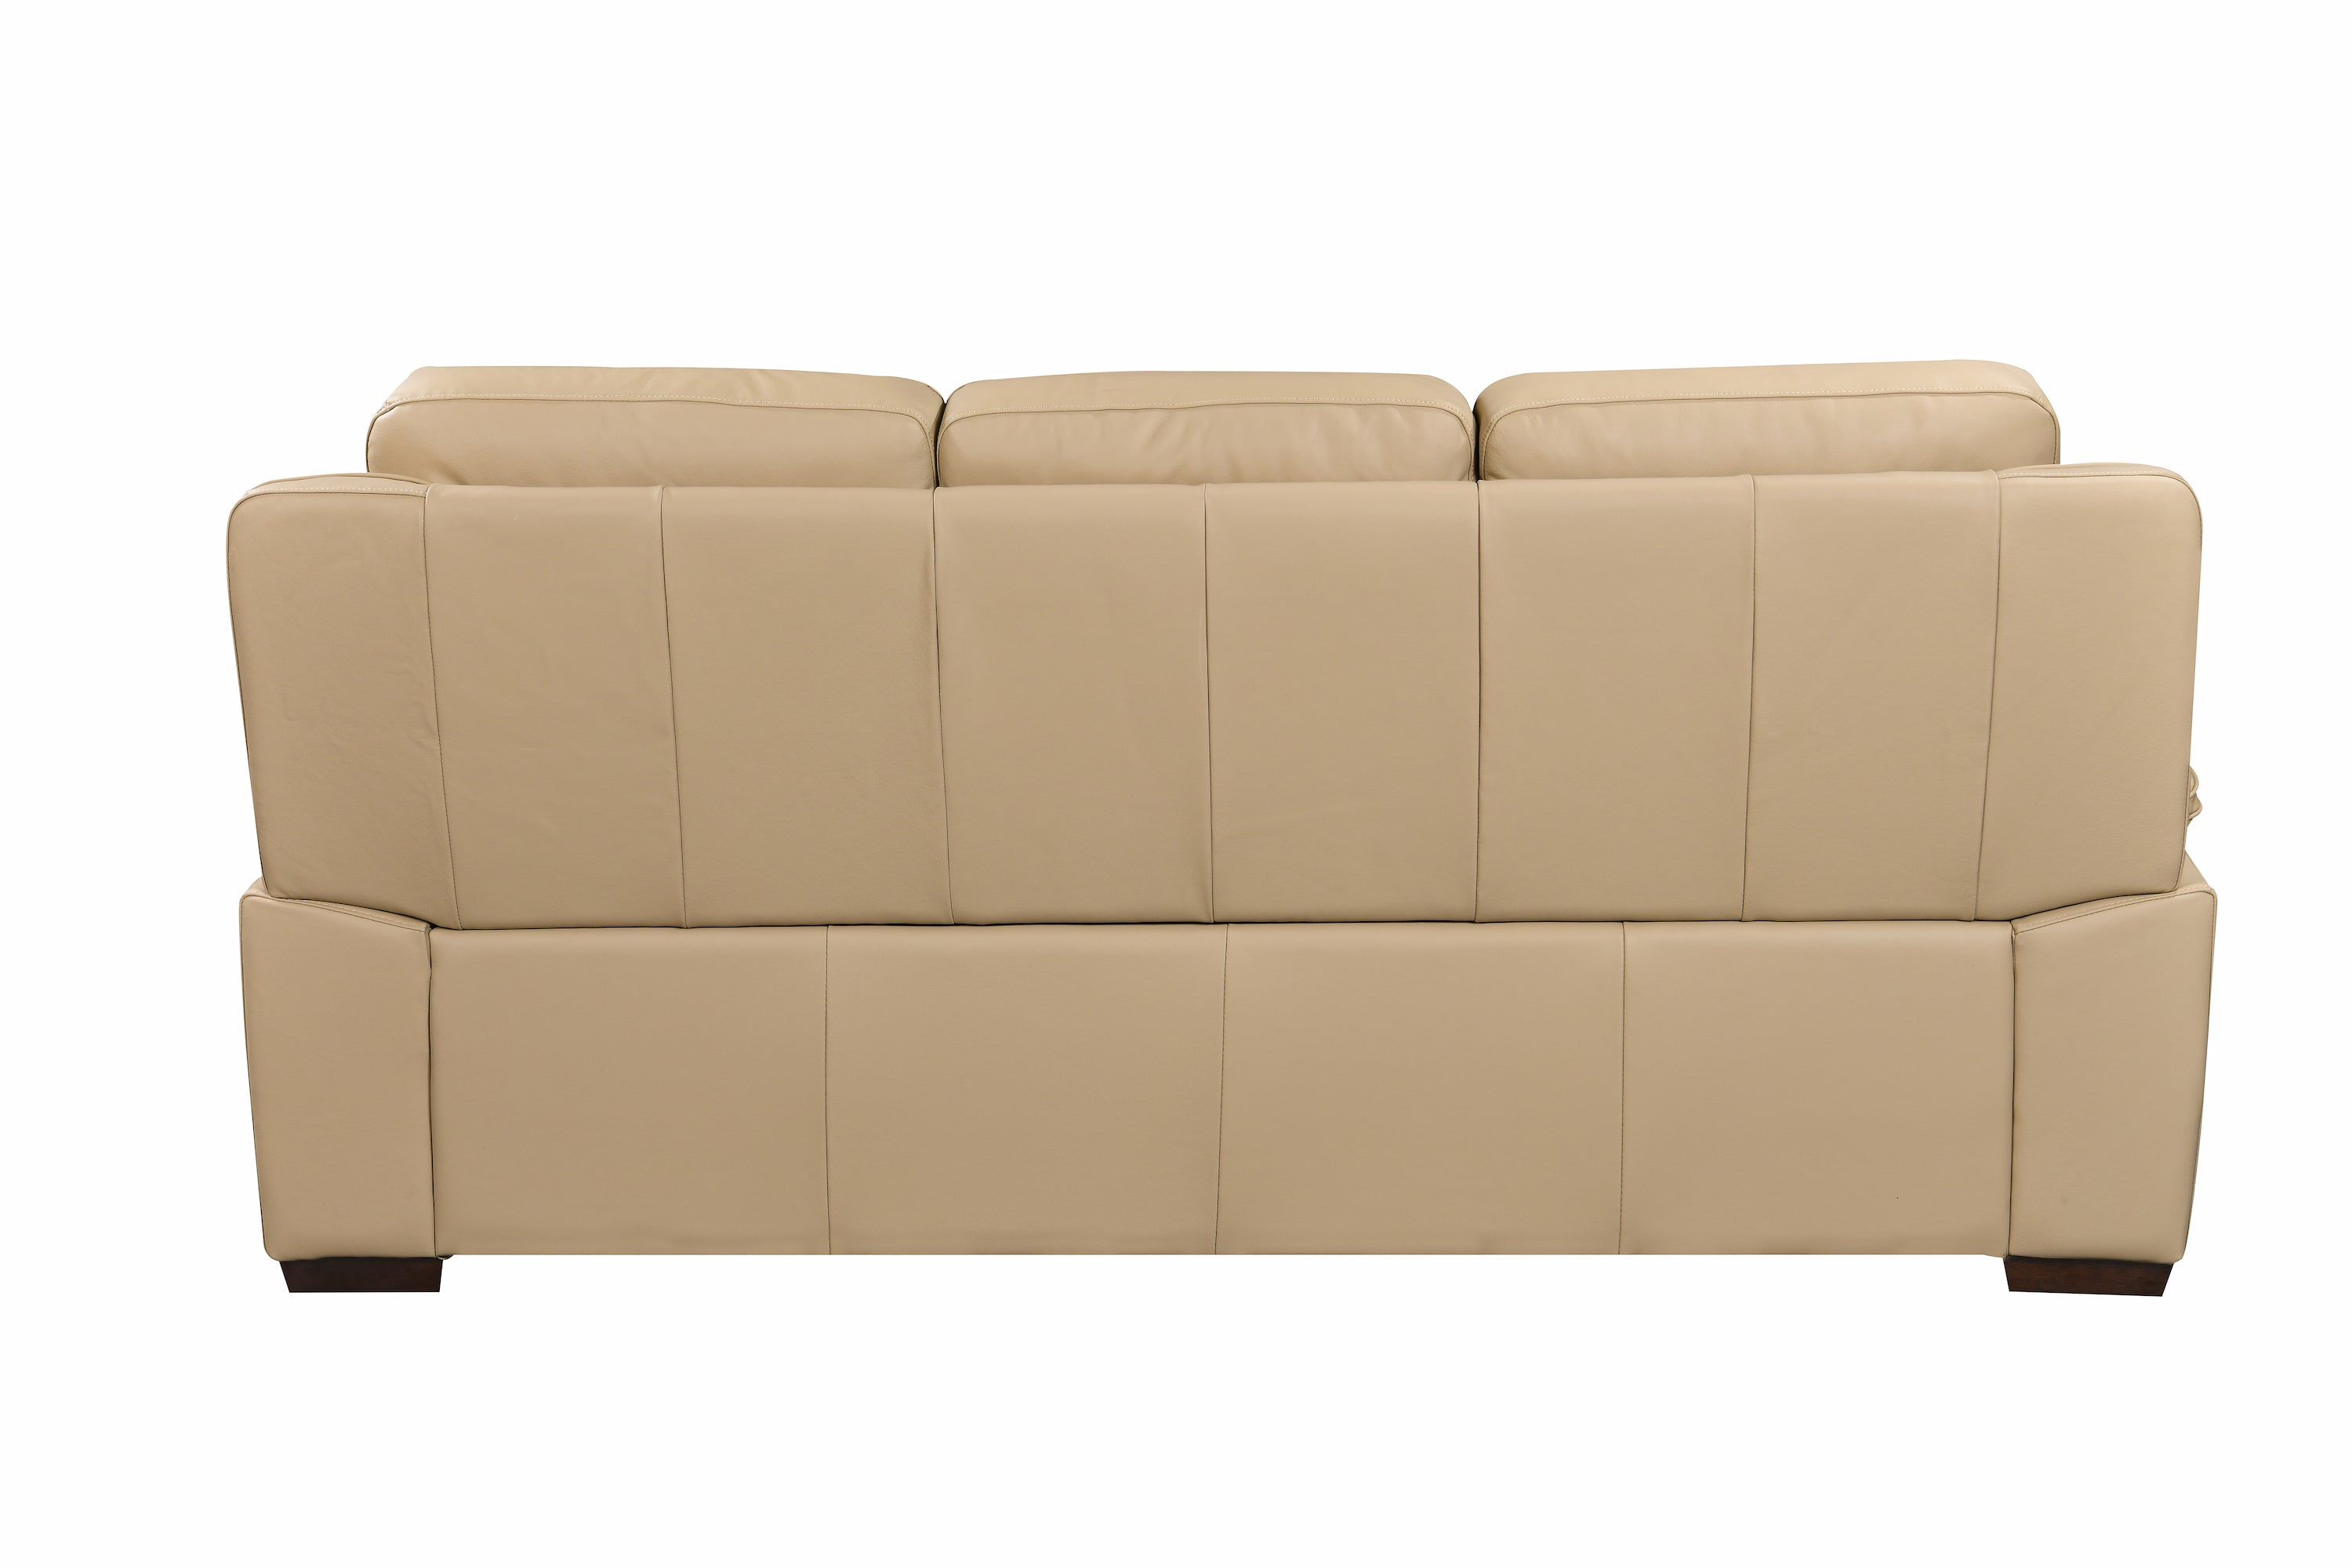 Mont Blanc Leather 3 Seater Sofa